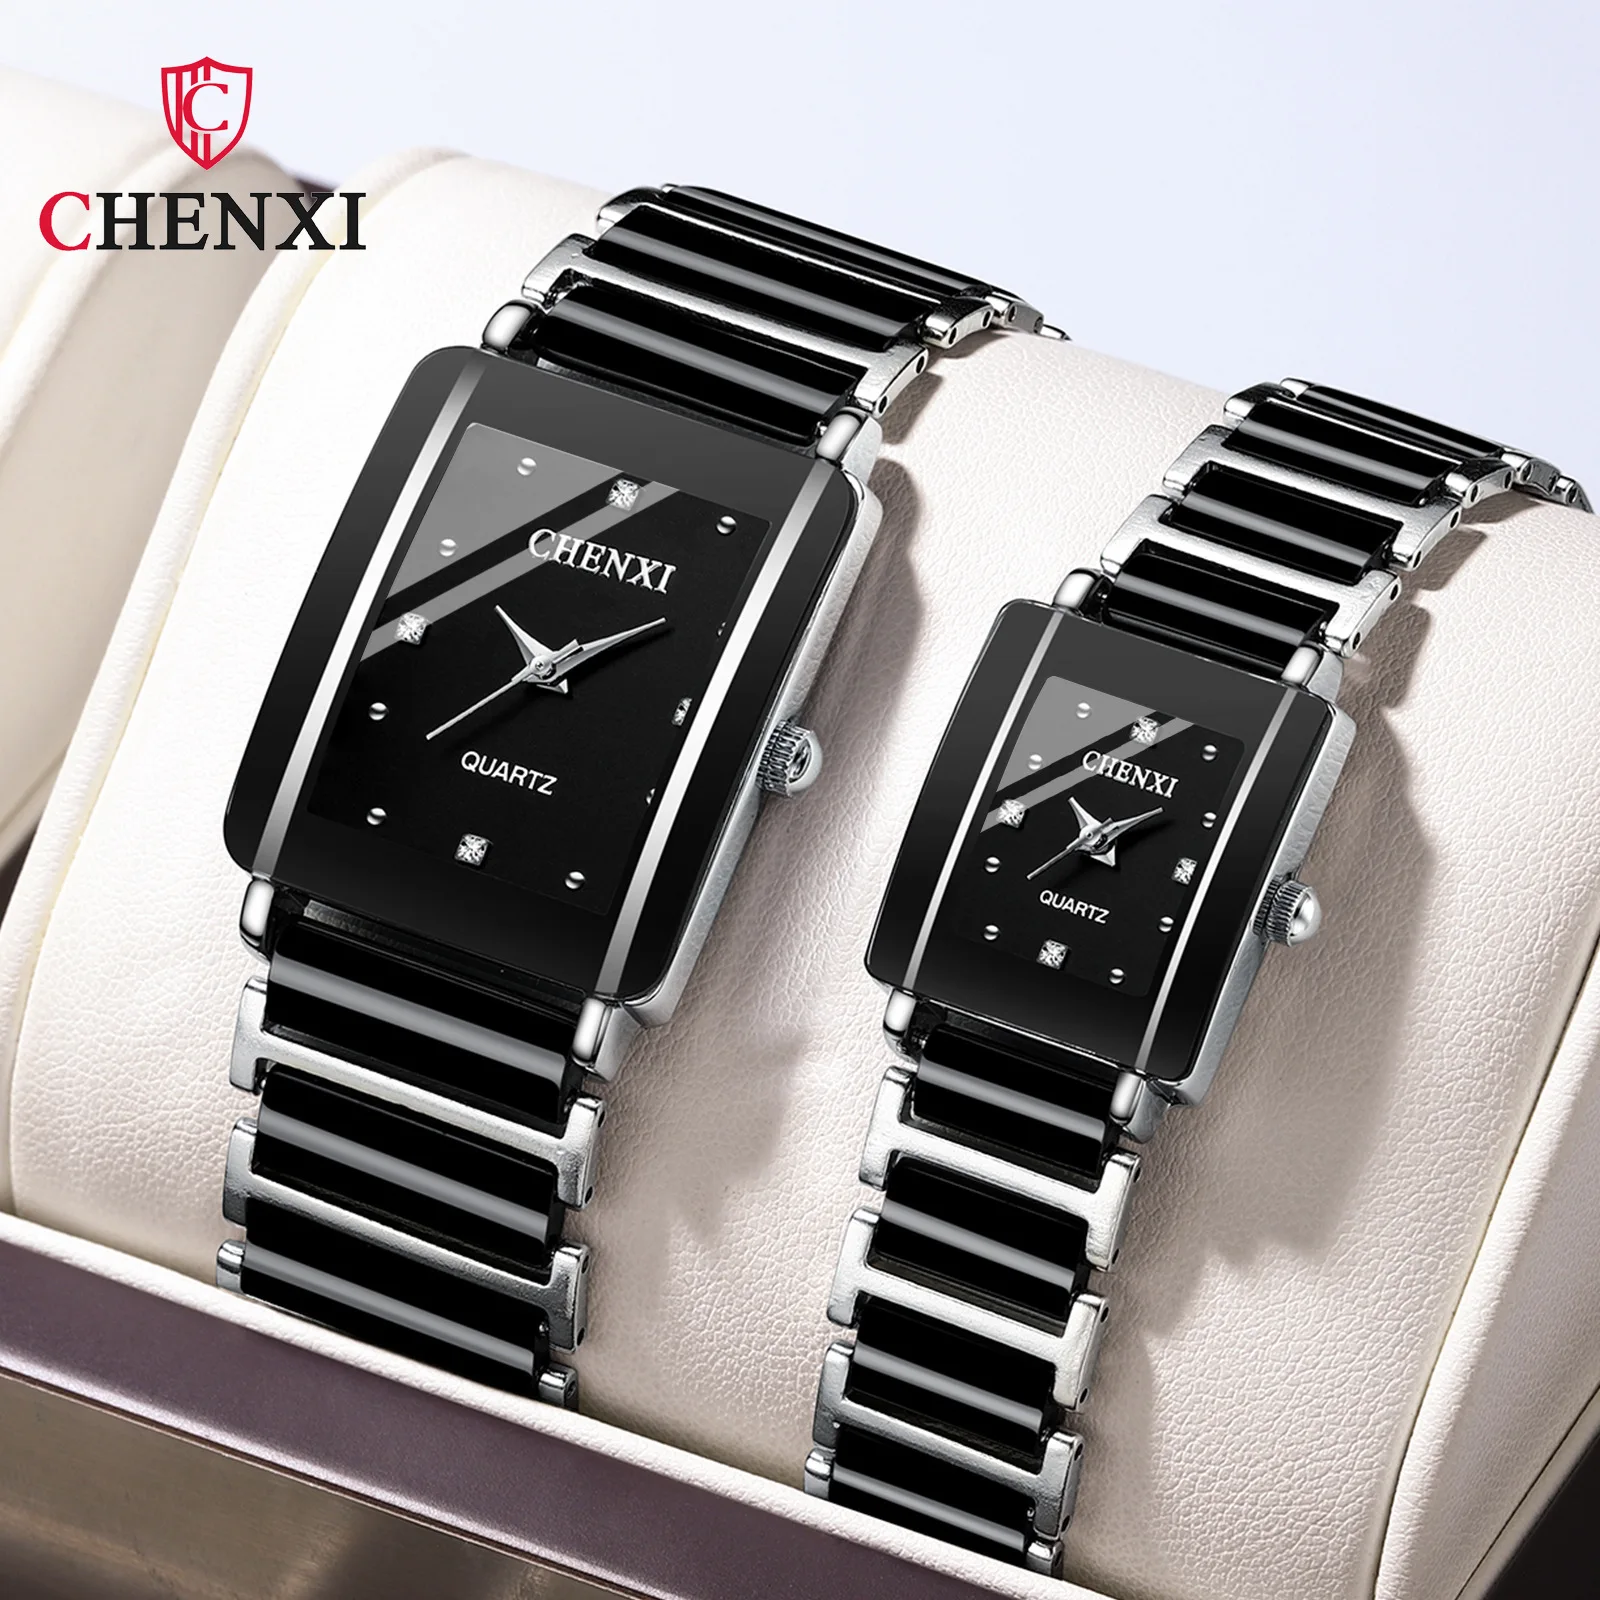 

Luxury Brand Square Watches Diamond His Hers Watch Sets For Men And Women Waterproof Stainless Steel Couple Items For Lovers